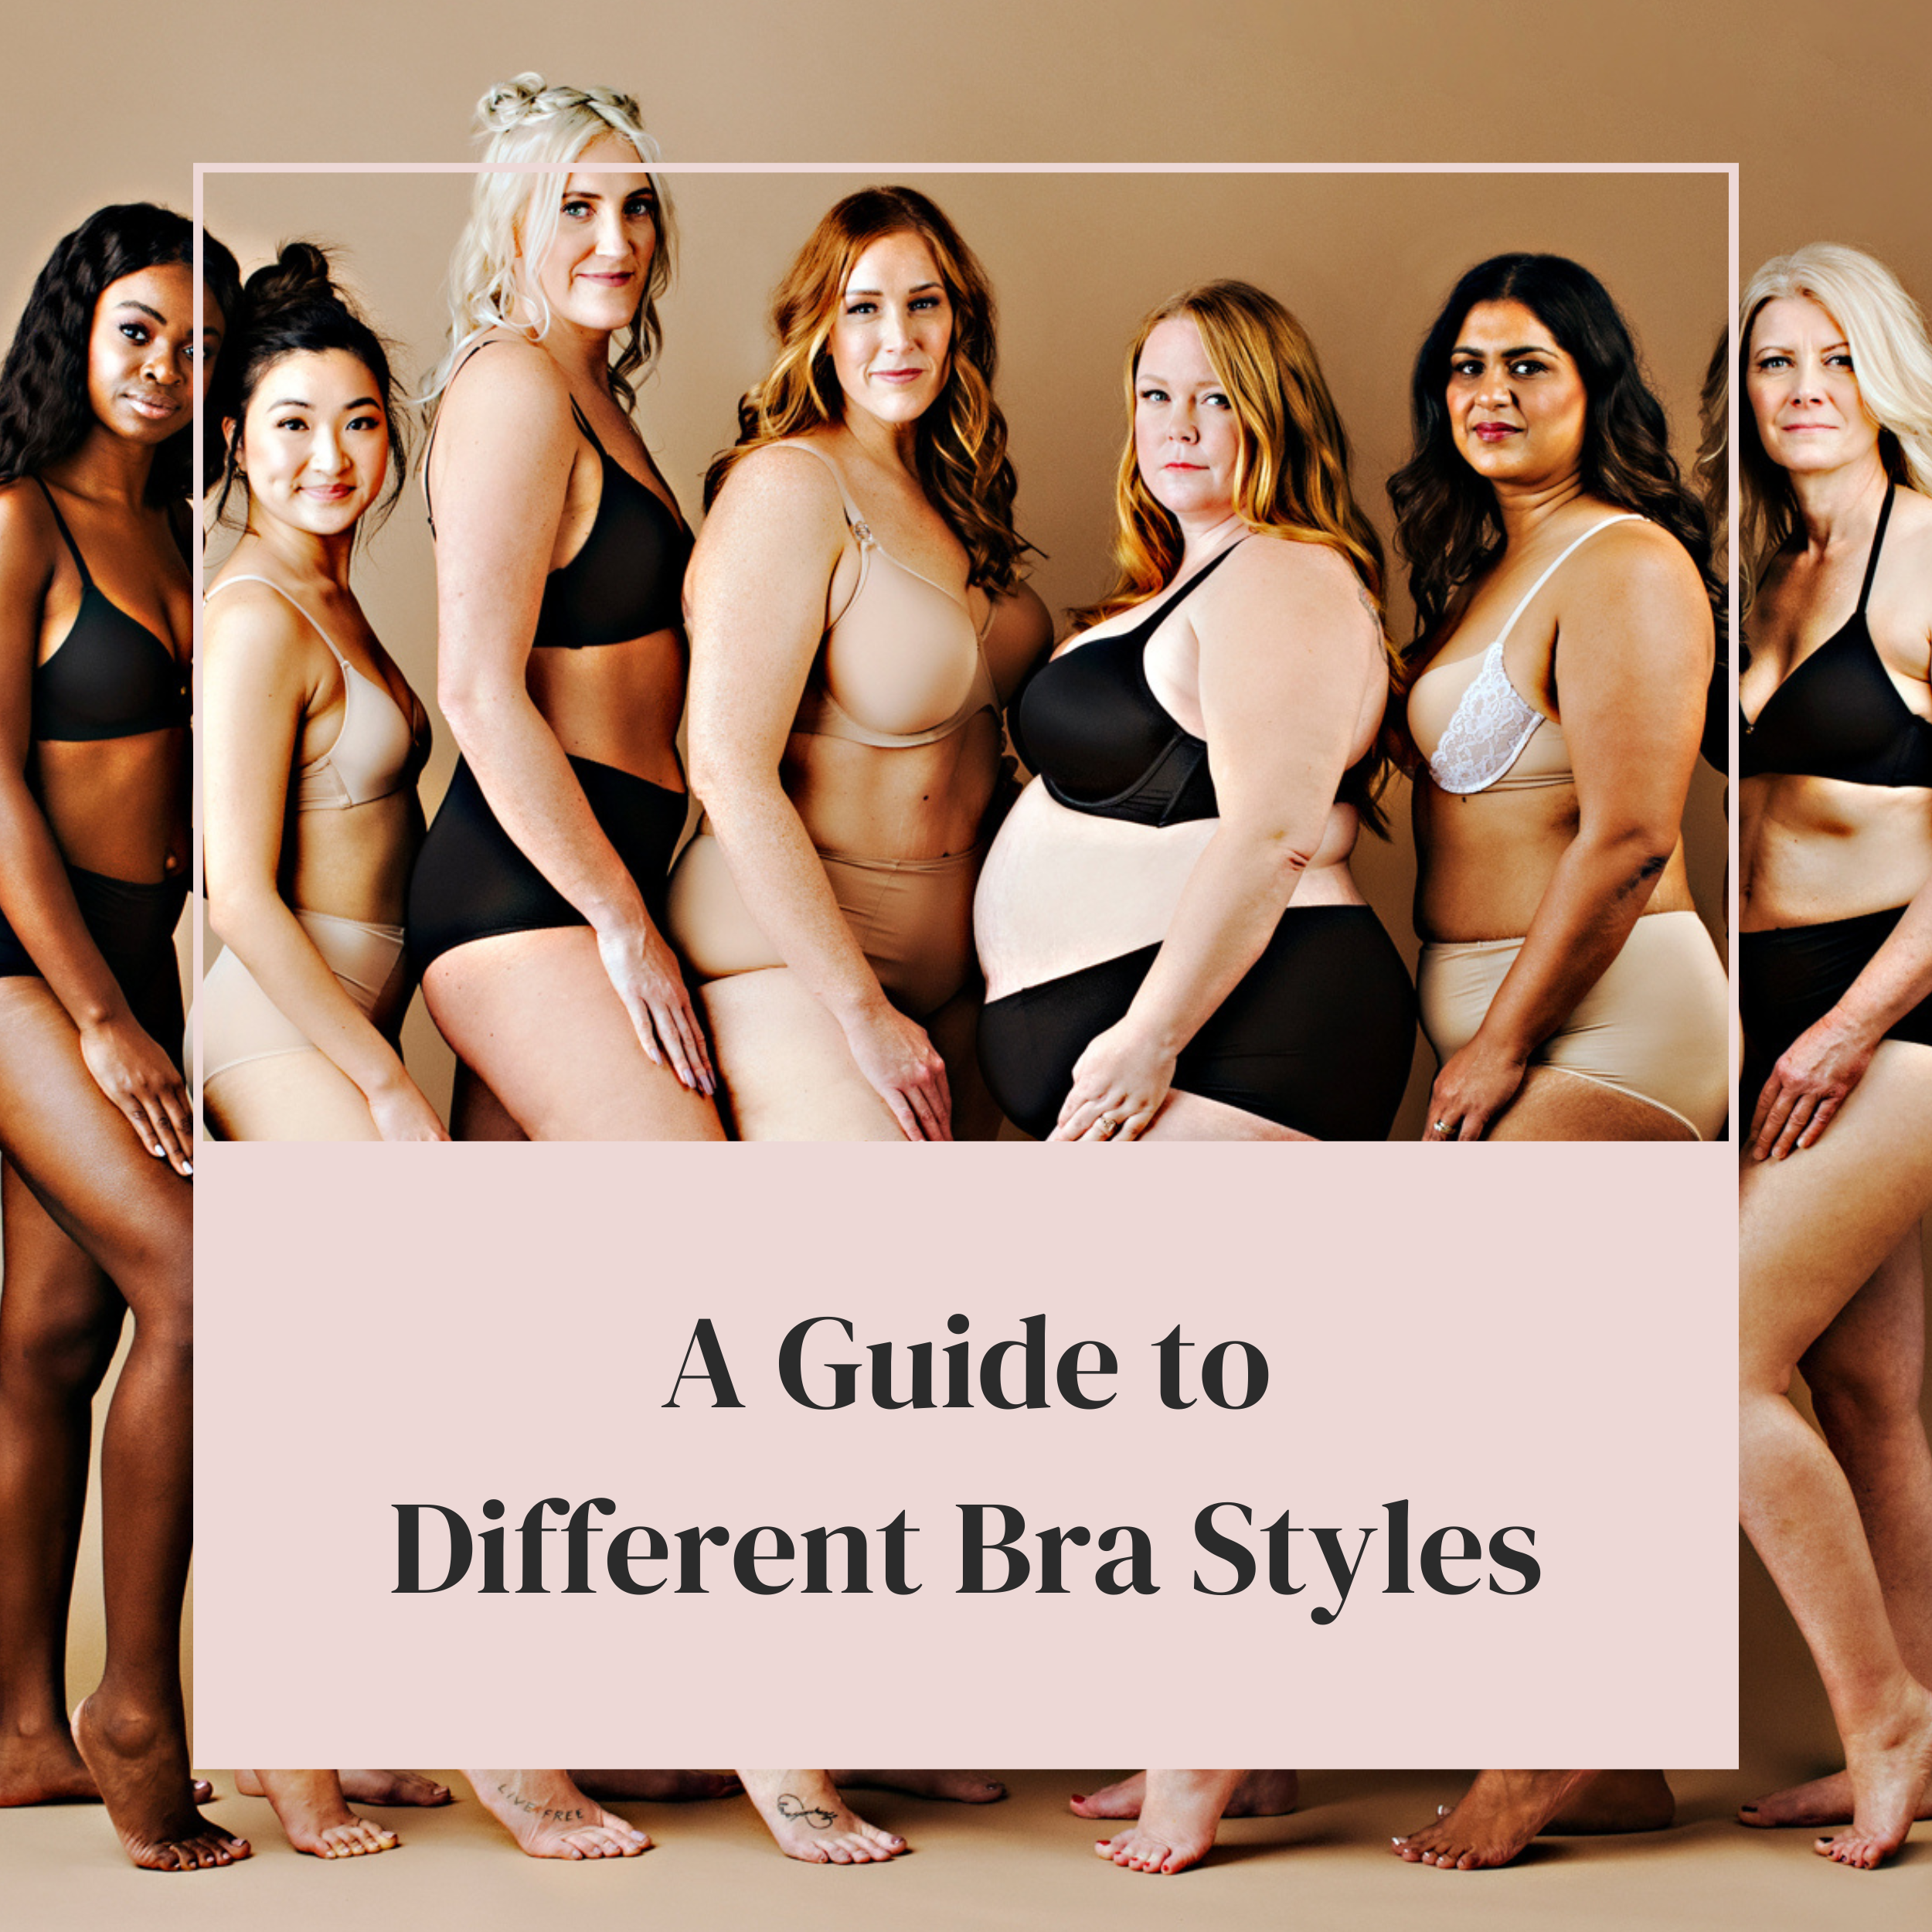 The ultimate guide to every bra style and when you should wear it